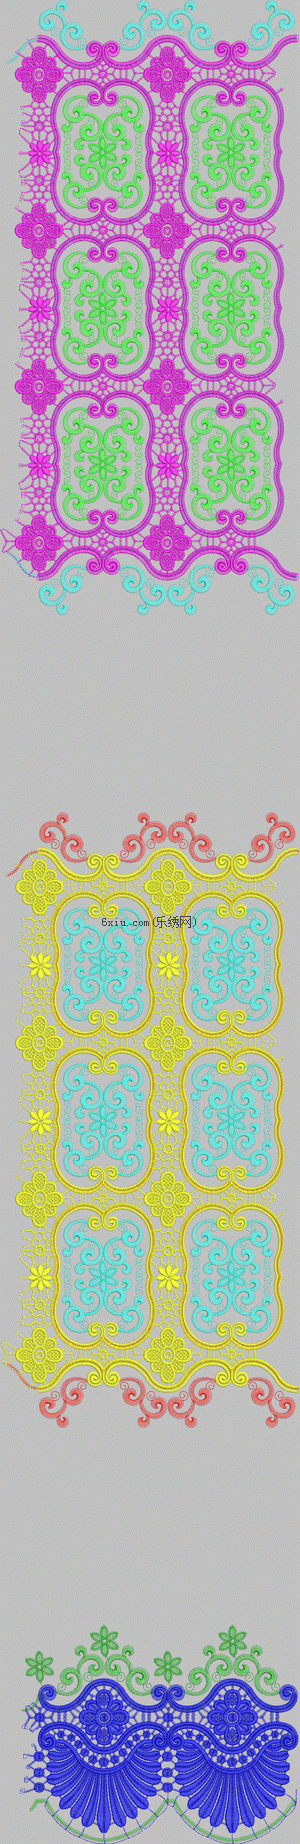 The curtain embroidery pattern album